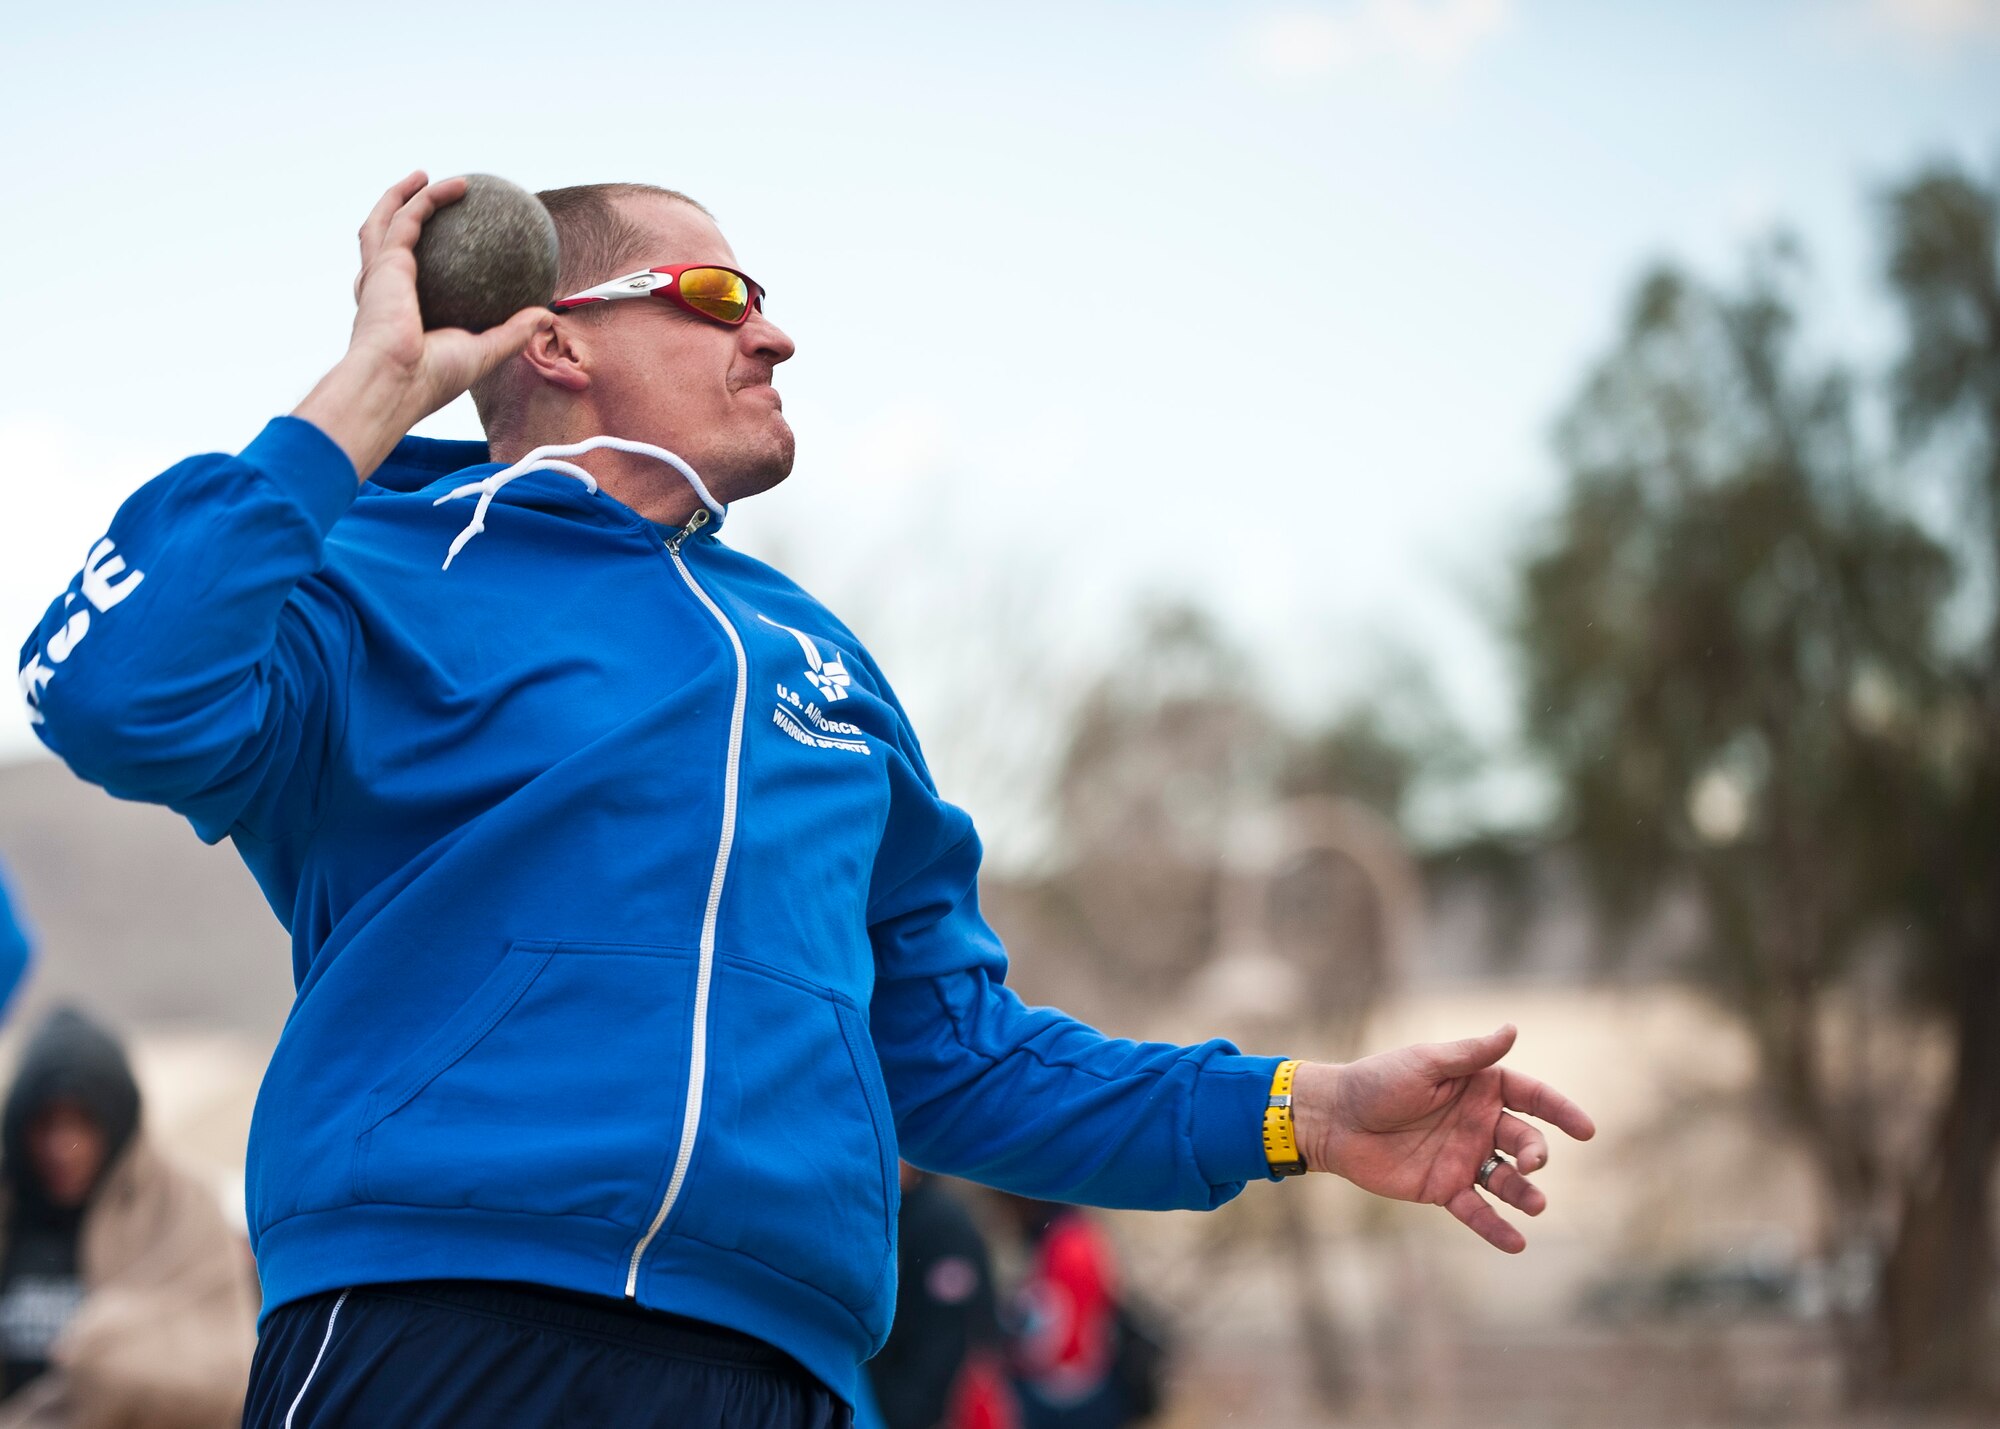 A participant in the 2015 U.S. Air Force Trials prepares to throw a shot-put during the field competition at Nellis Air Force Base, Nev., March 3, 2015. During the trials, participants will be competing for a spot on the 2015 U.S. Air Force Wounded Warrior Team, which will represent the Air Force at adaptive sports events throughout the year.  (U.S. Air Force photo by Staff Sgt. Siuta B. Ika)